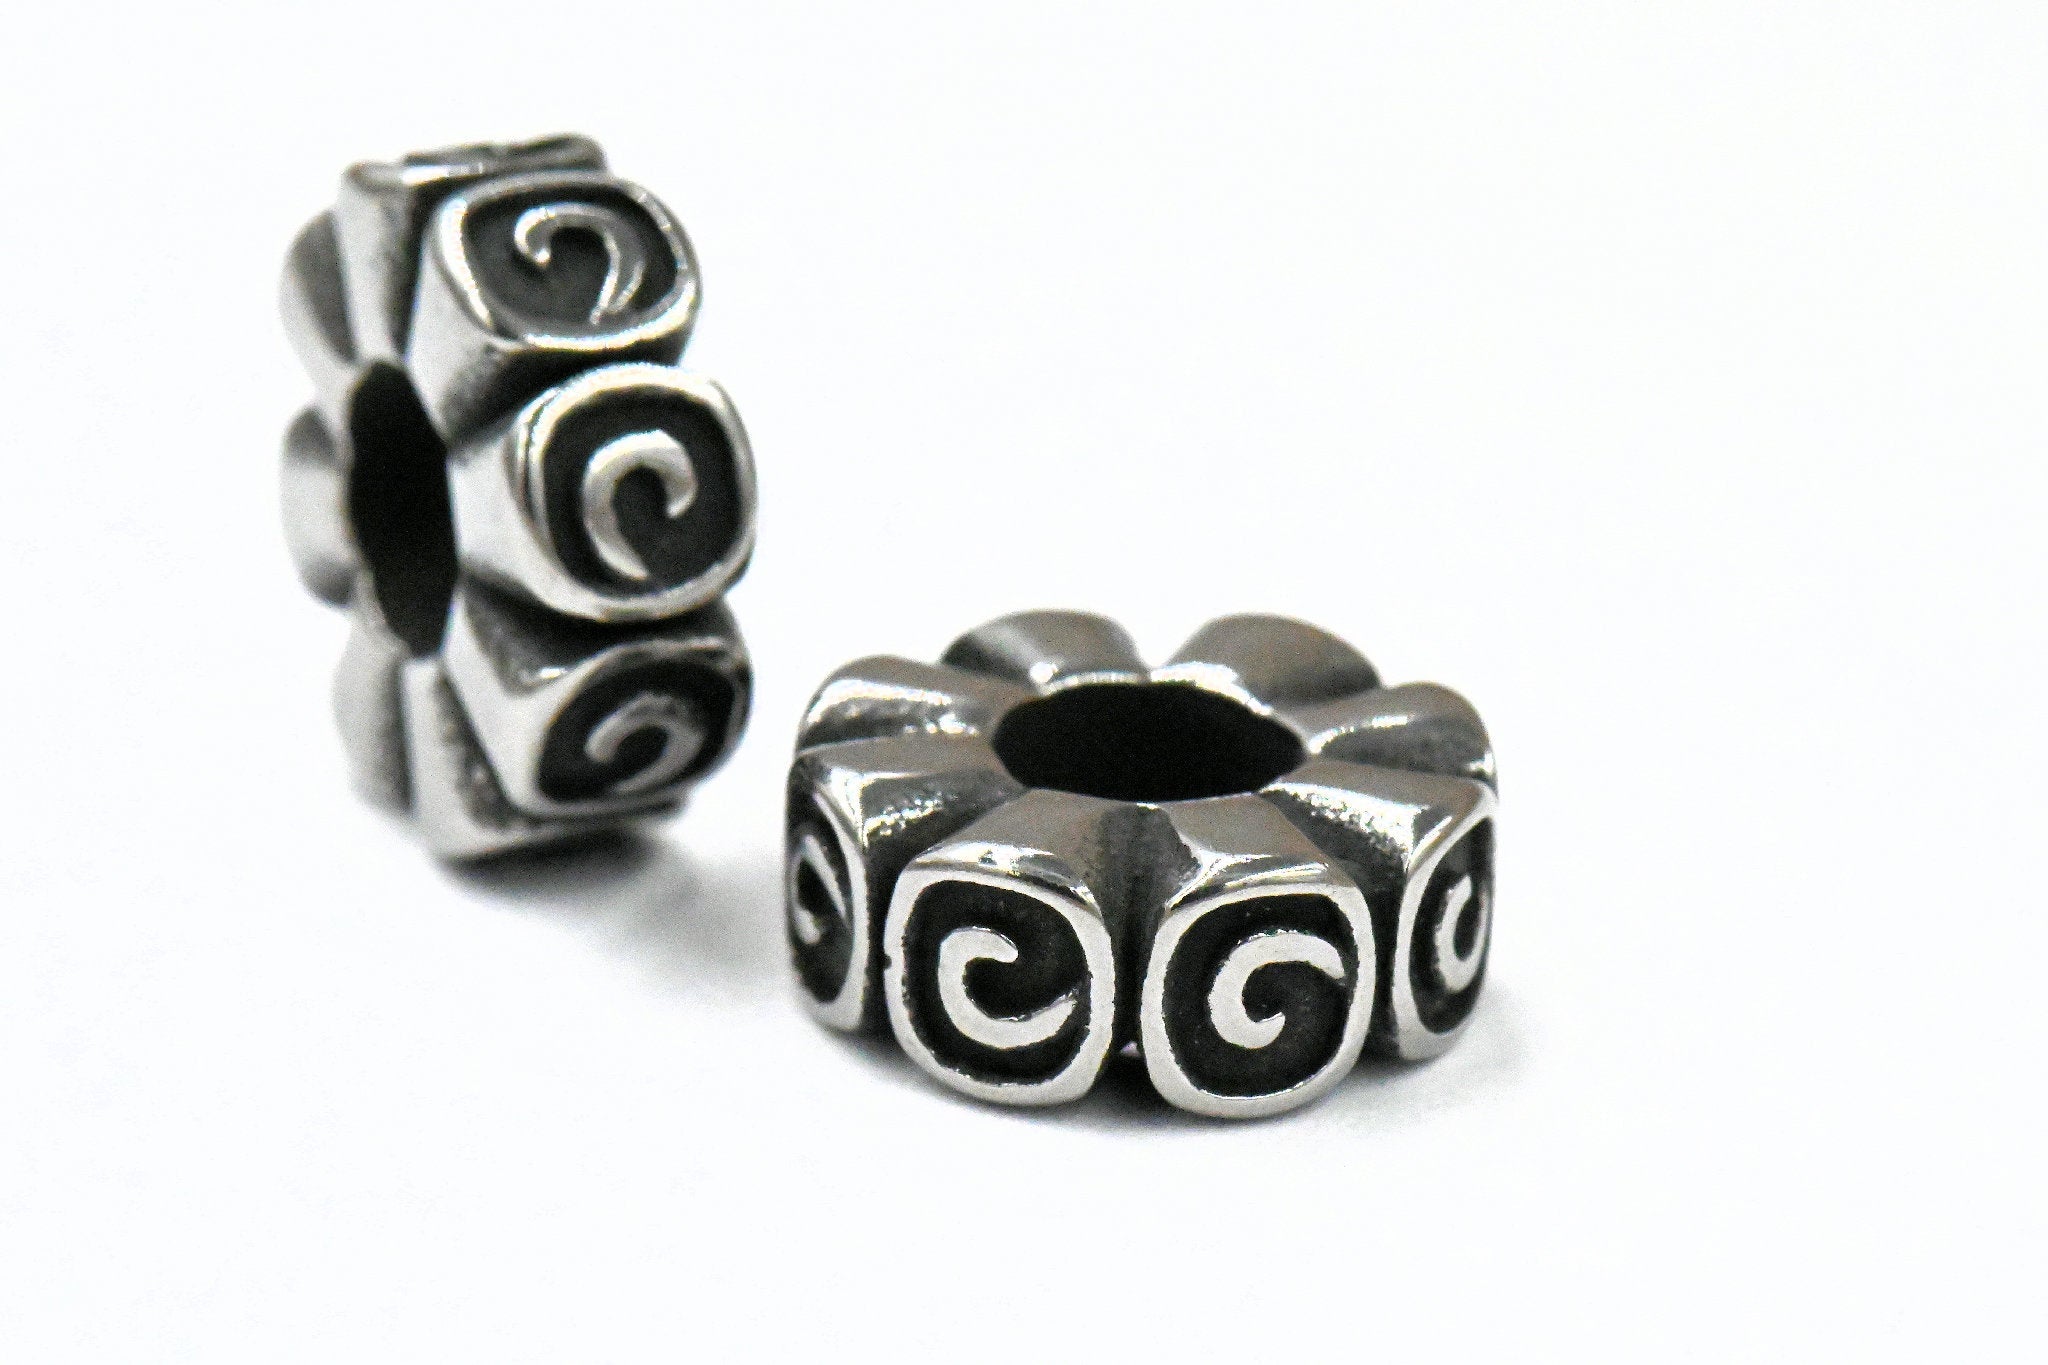 Large Hole Beads, 304 Stainless Steel Spacer Beads, 1pc Swirl Wheel Antique Silver, 5x14mm